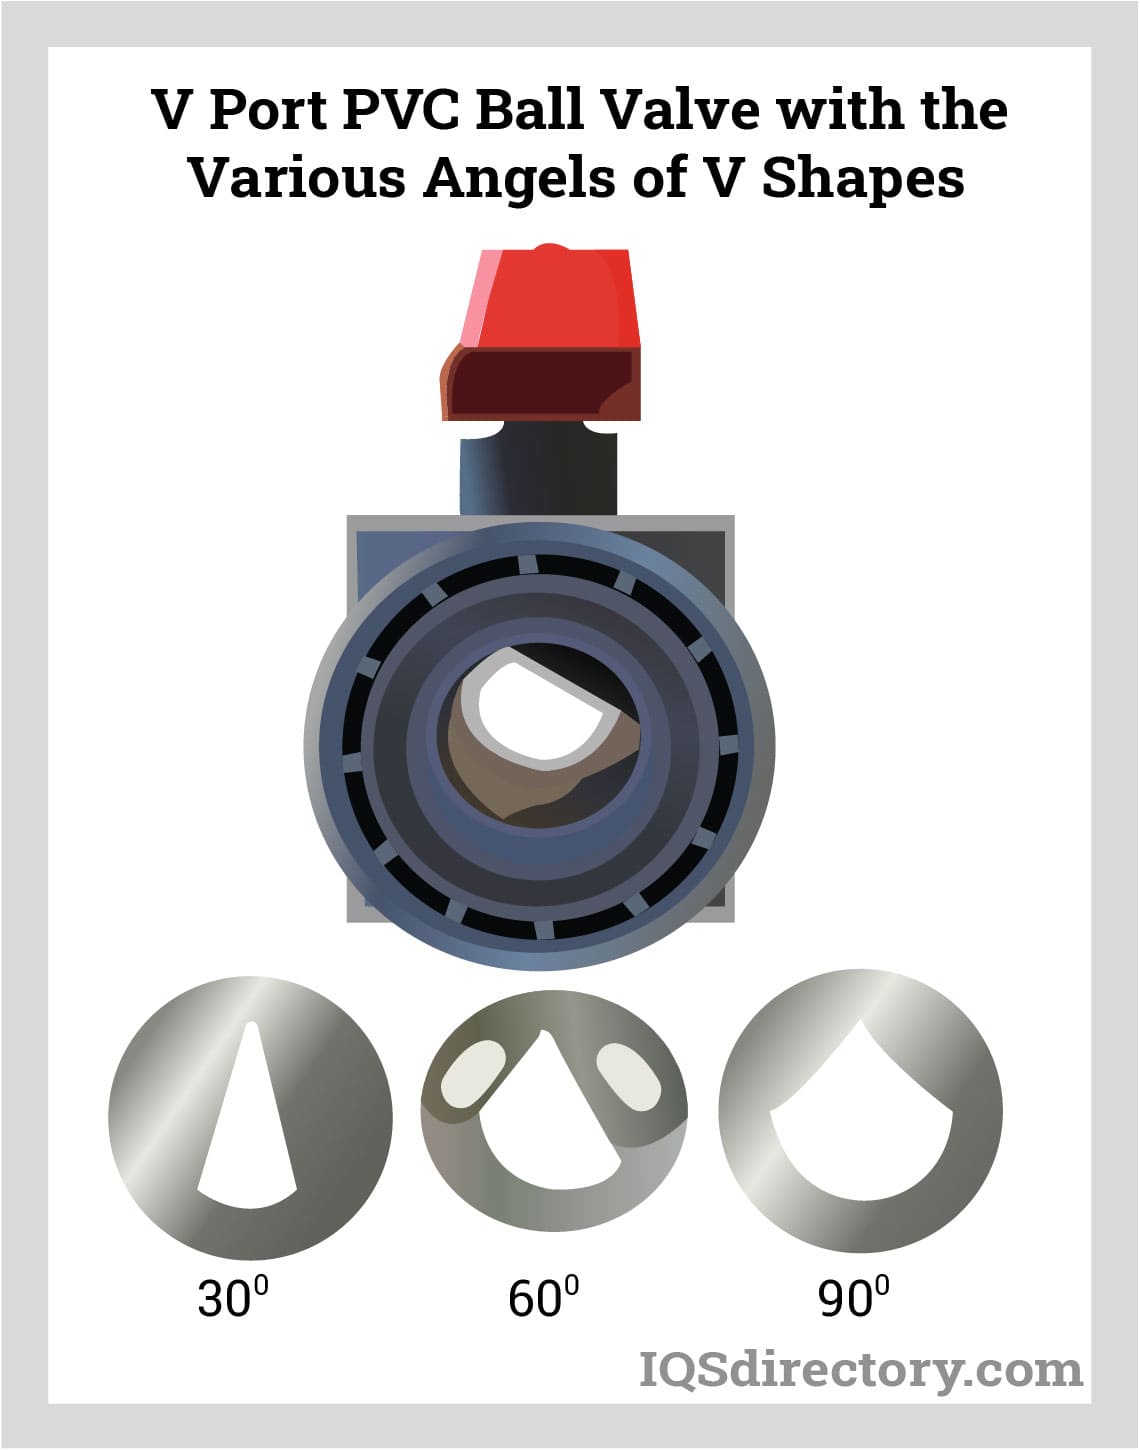 V Port PVC Ball Valve with the Various Angels of V Shapes